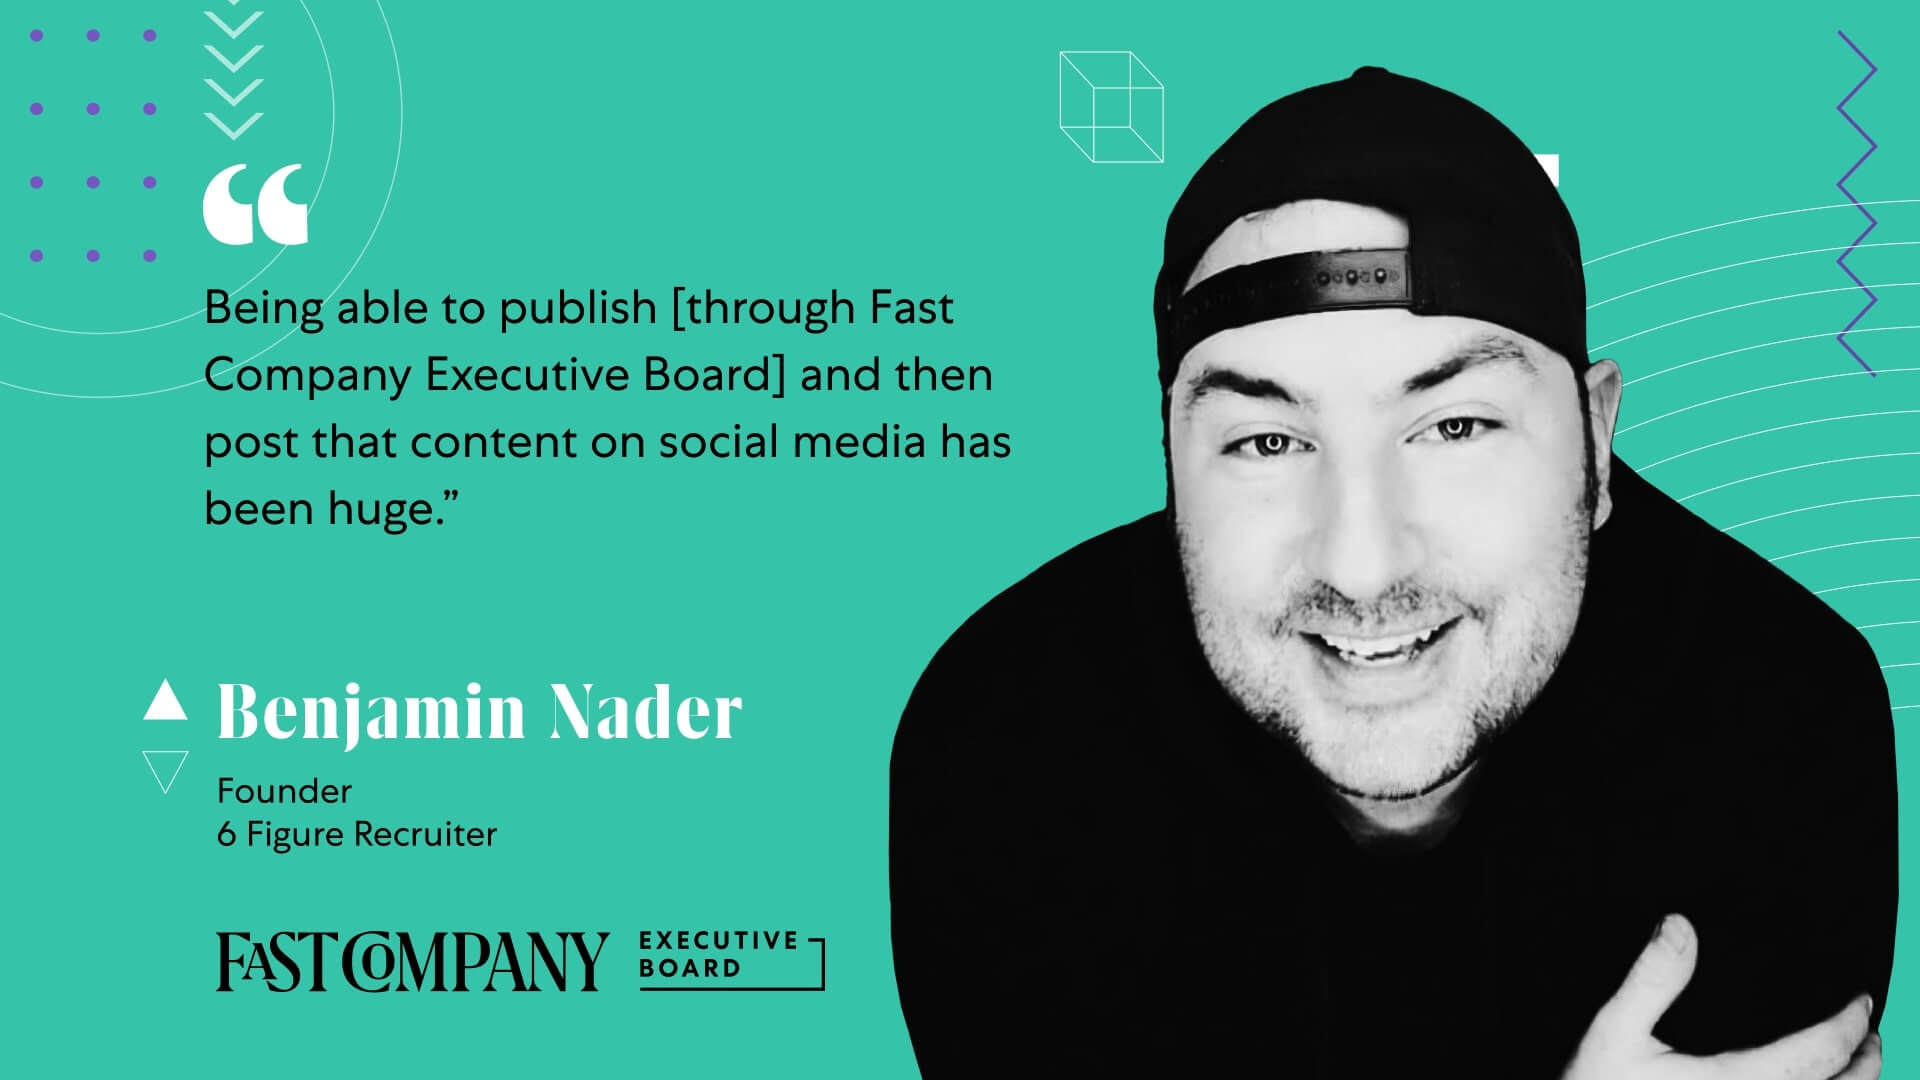 Fast Company Executive Board Provides Ben Nader With a Content Marketing Outlet